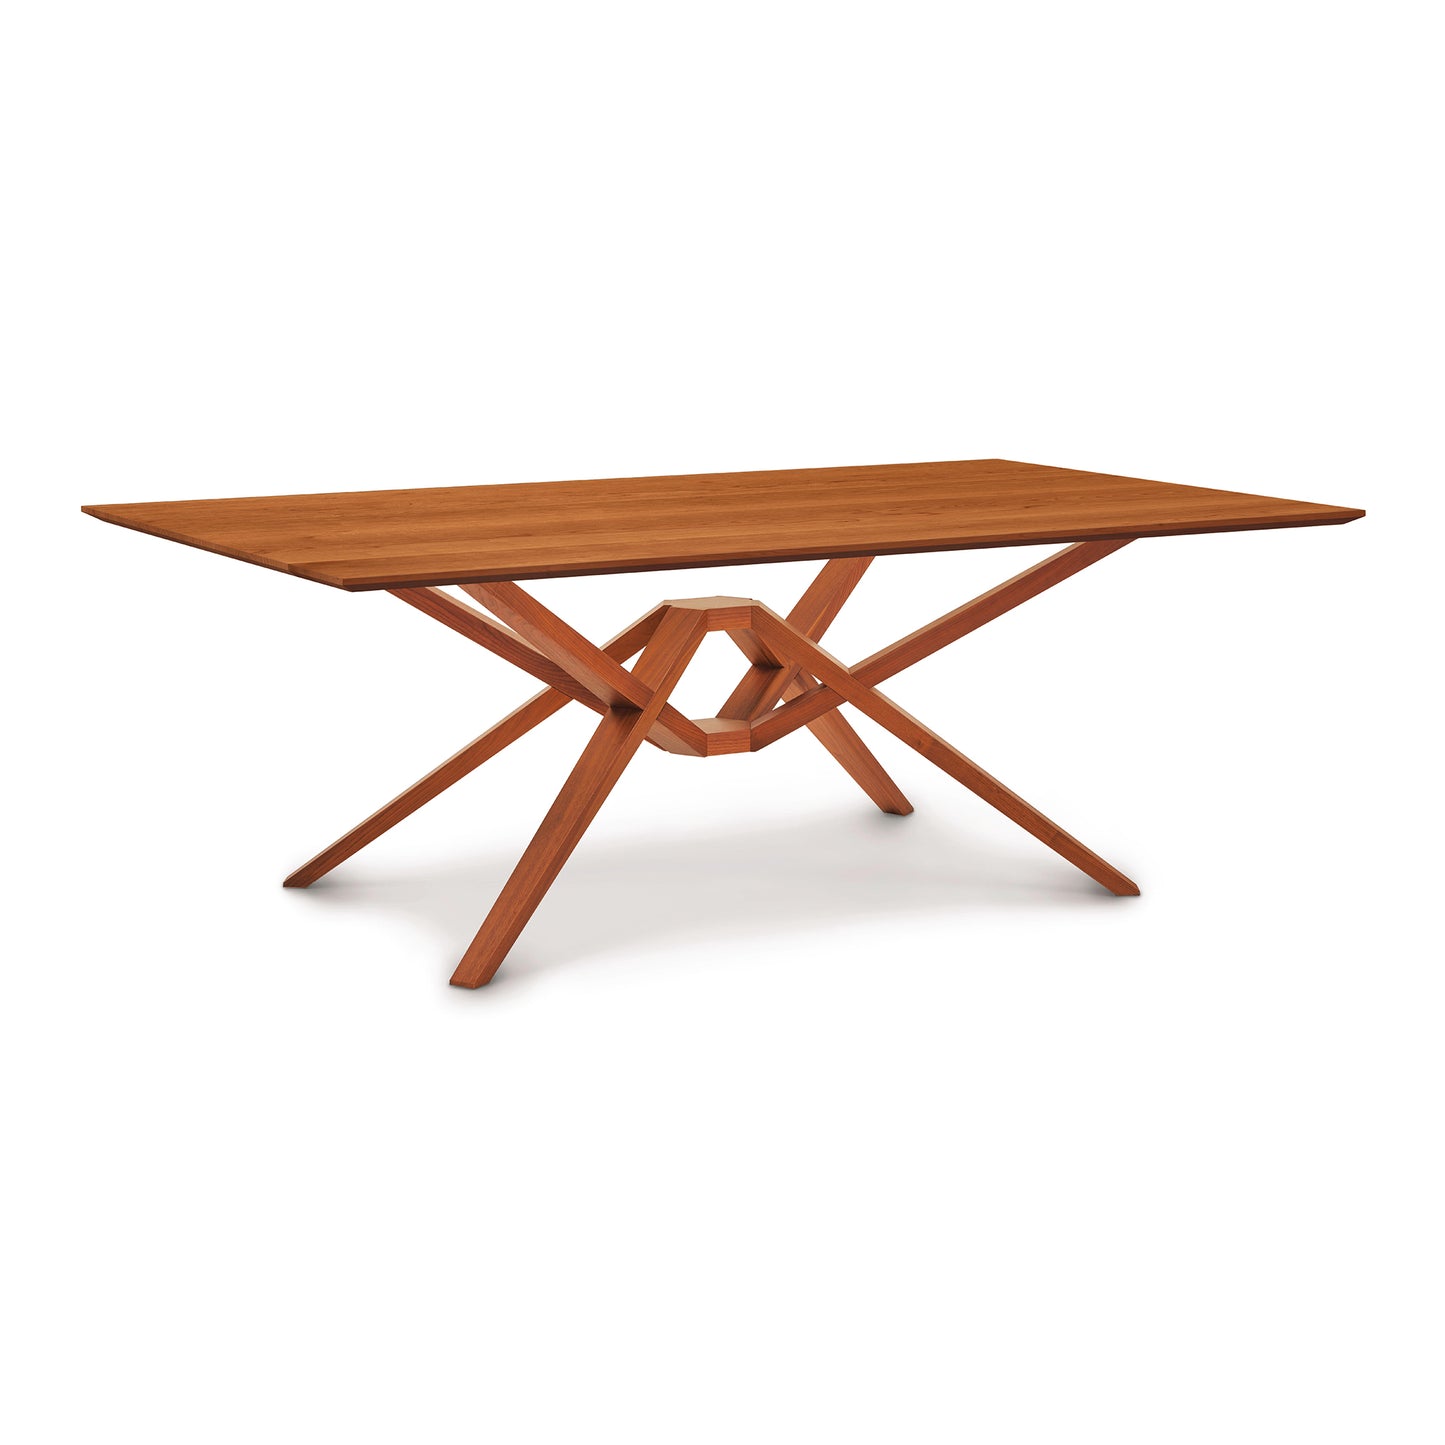 The Copeland Furniture Exeter Solid Top Dining Table offers a modern dining table with a solid top and a wooden base.